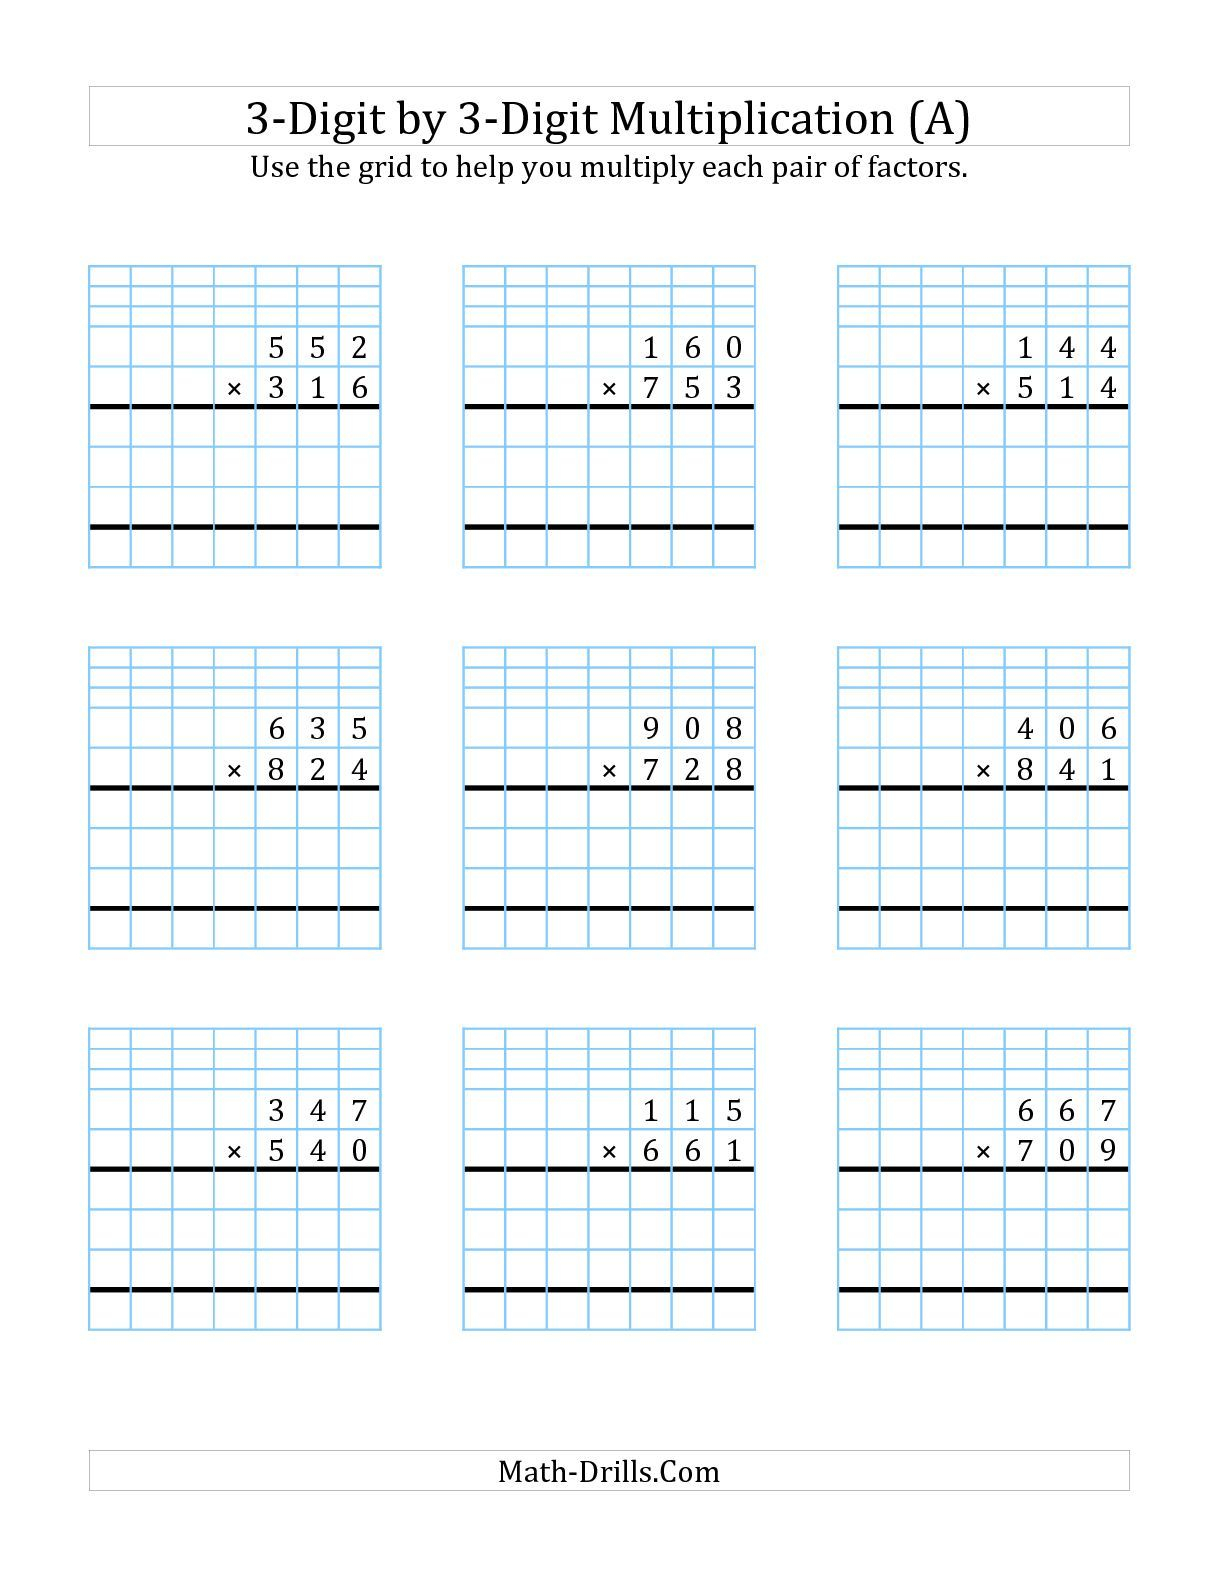 Requested And Added. 3-Digit3-Digit Multiplication With